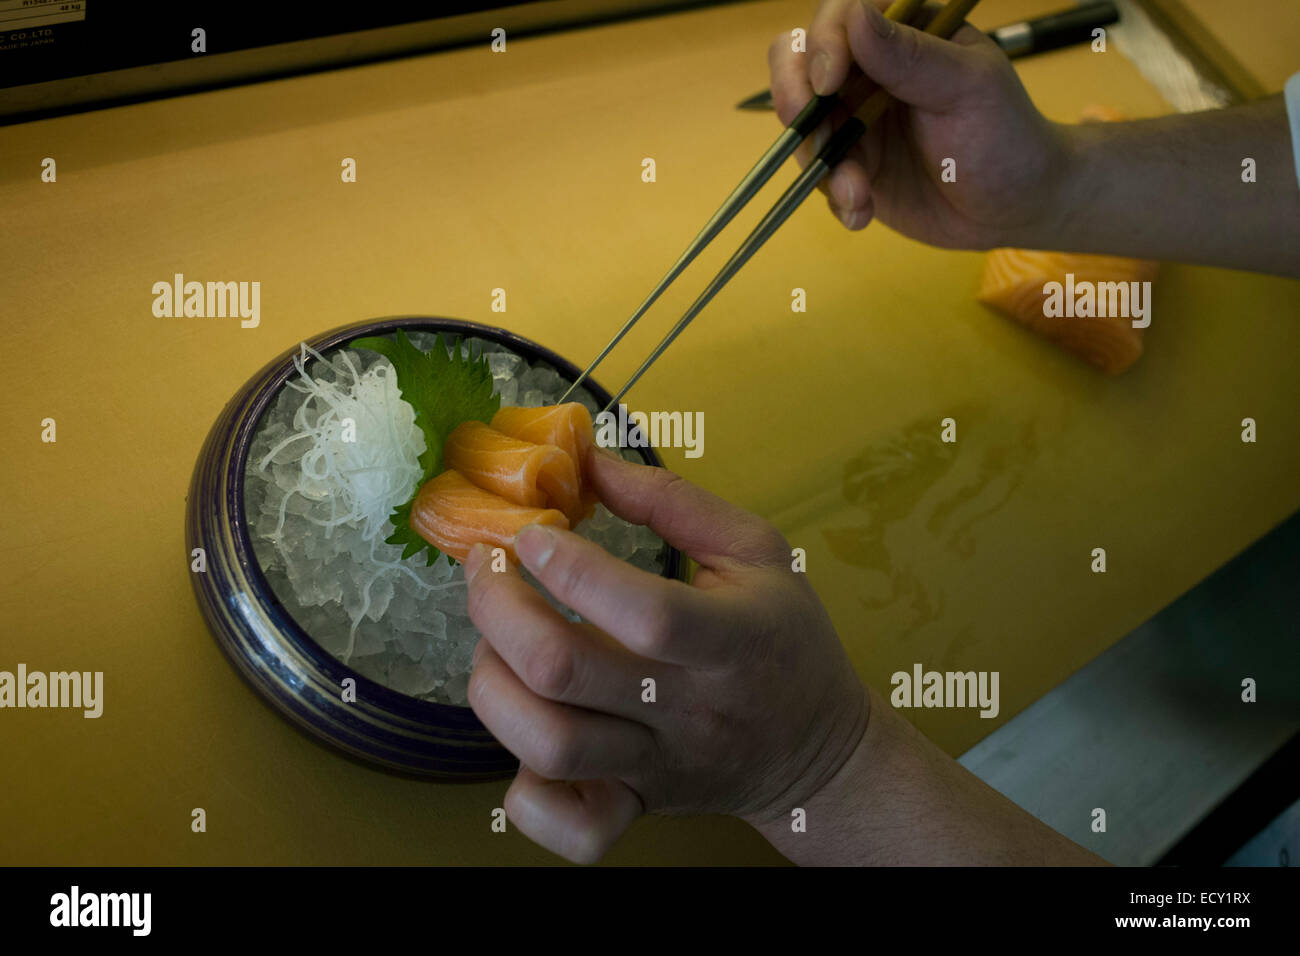 Detail of a chef's hands, preparing salmon with tongs in 'So', a sushi restaurant in central London. Stock Photo